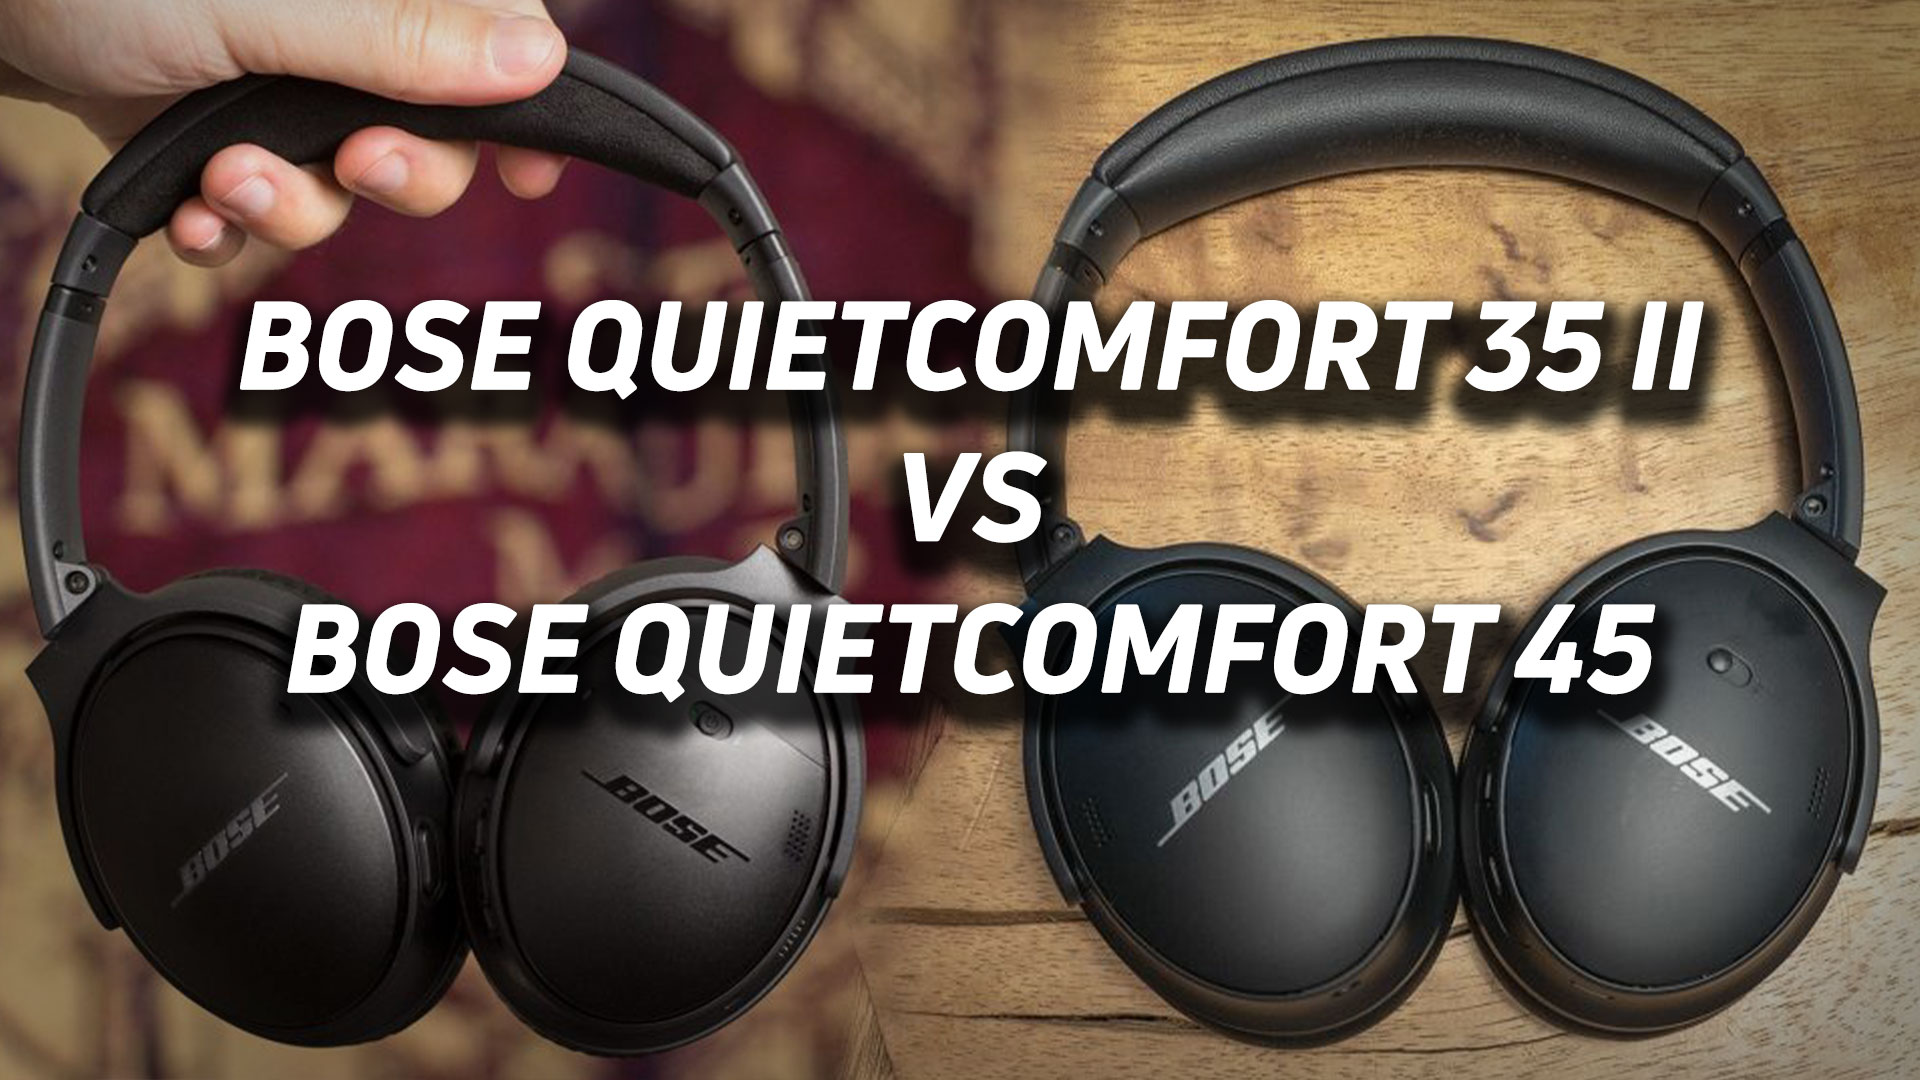 The Bose QuietComfort 35 II and Bose QuietComfort 45 in a combined blended image with versus text overlaid.